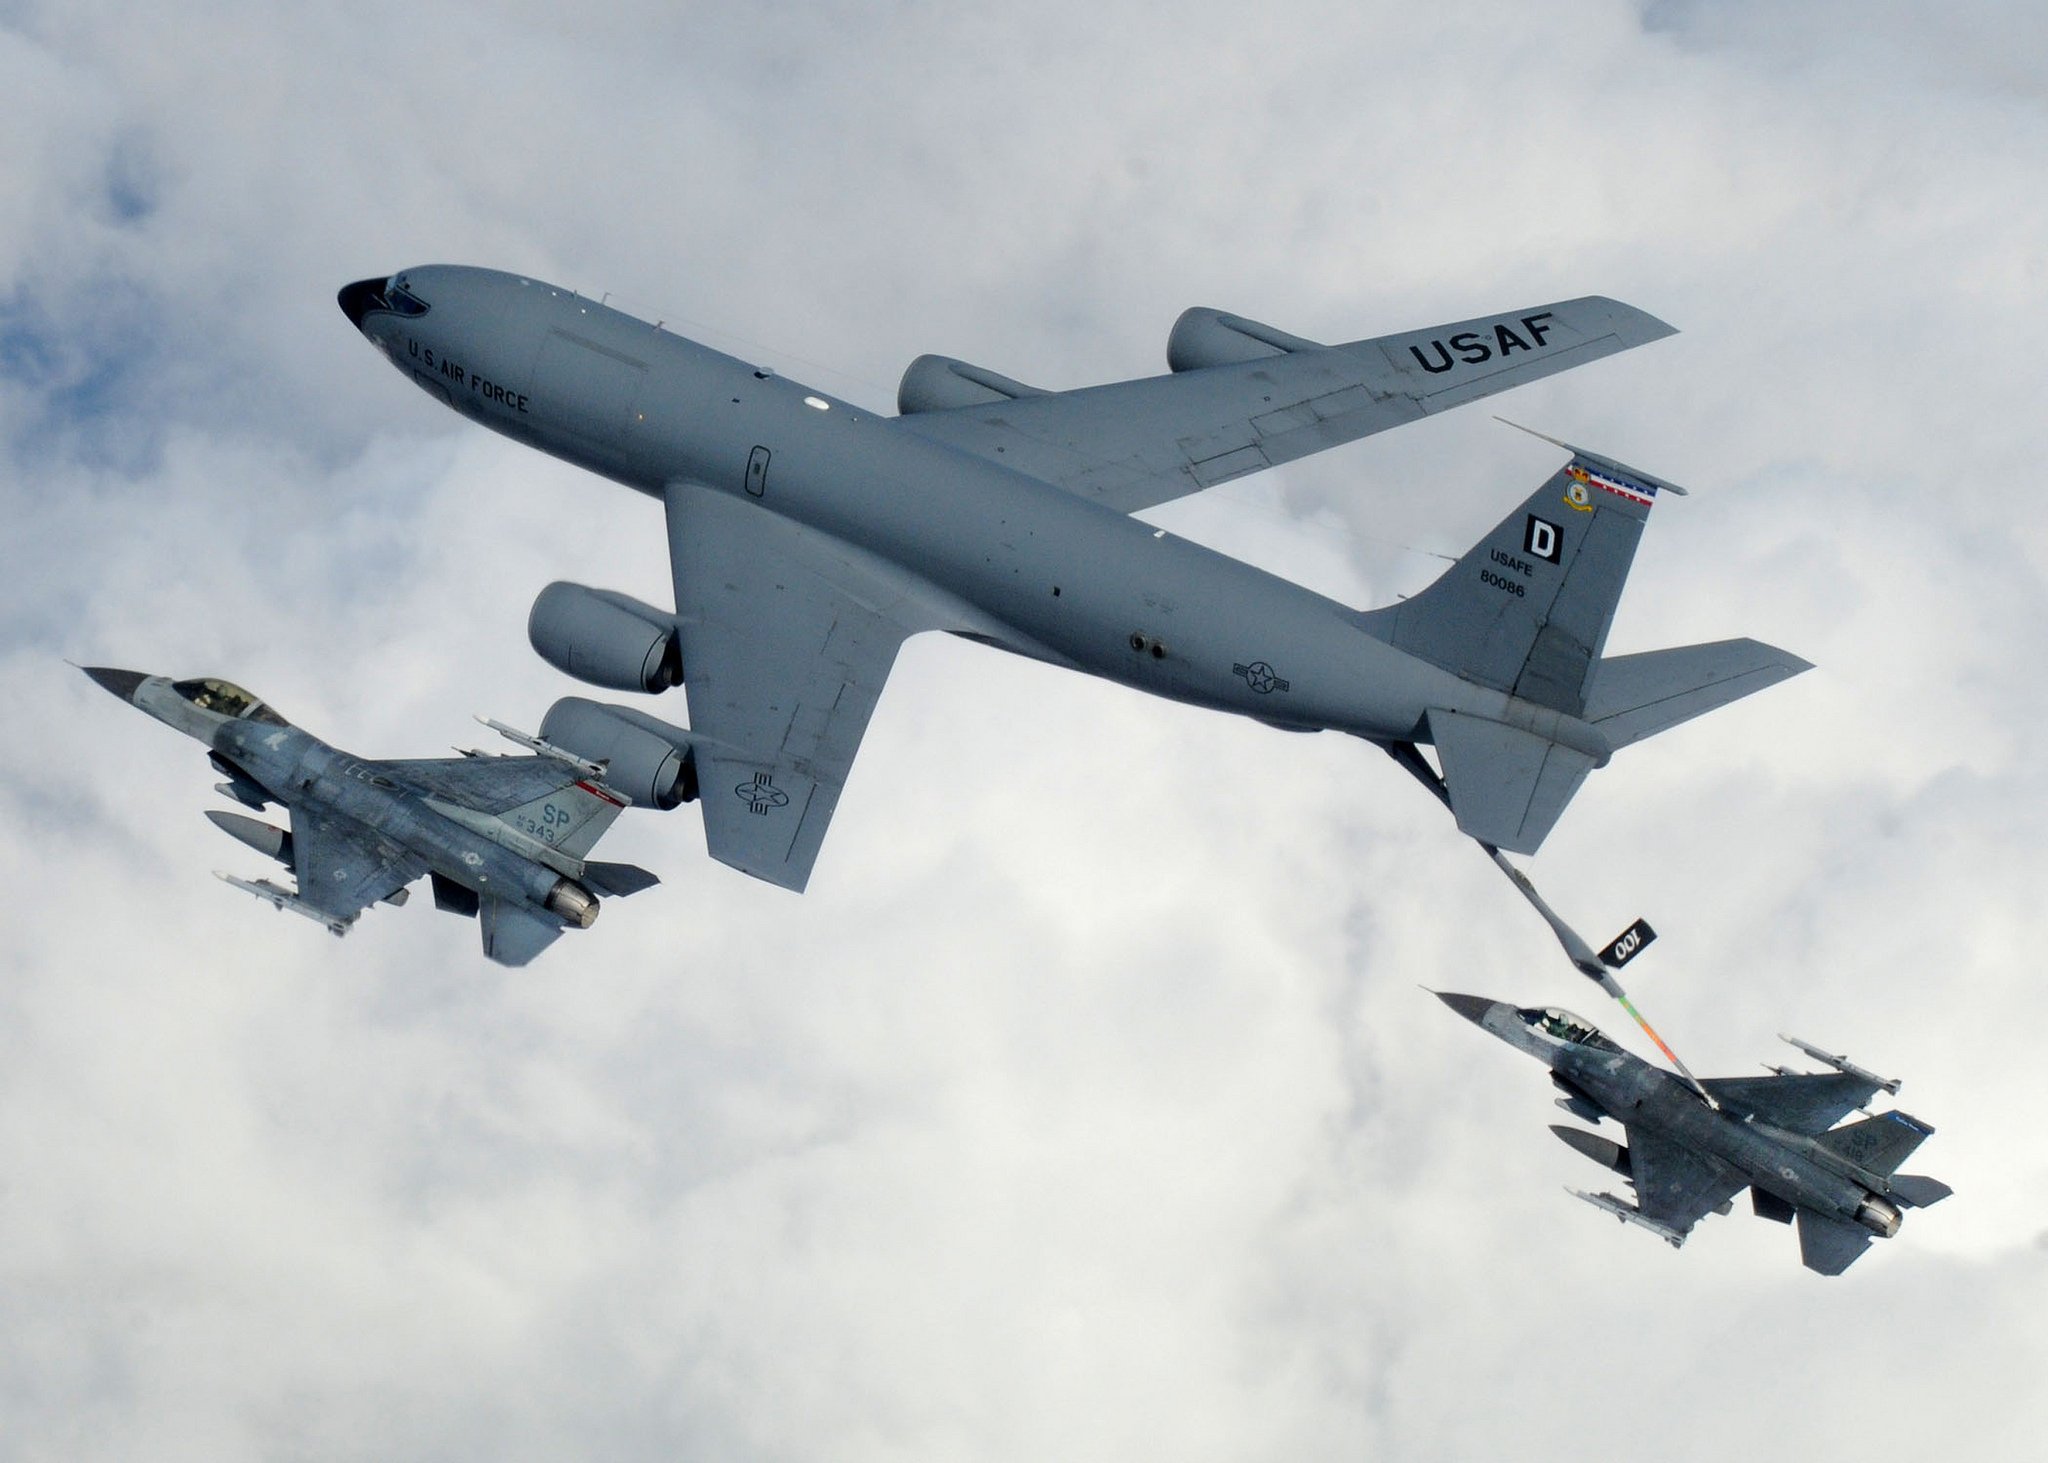 1967, Boeing, Kc 135, Stratotanker, Aircrafts, Ravitailleur, Military, Us air force Wallpaper